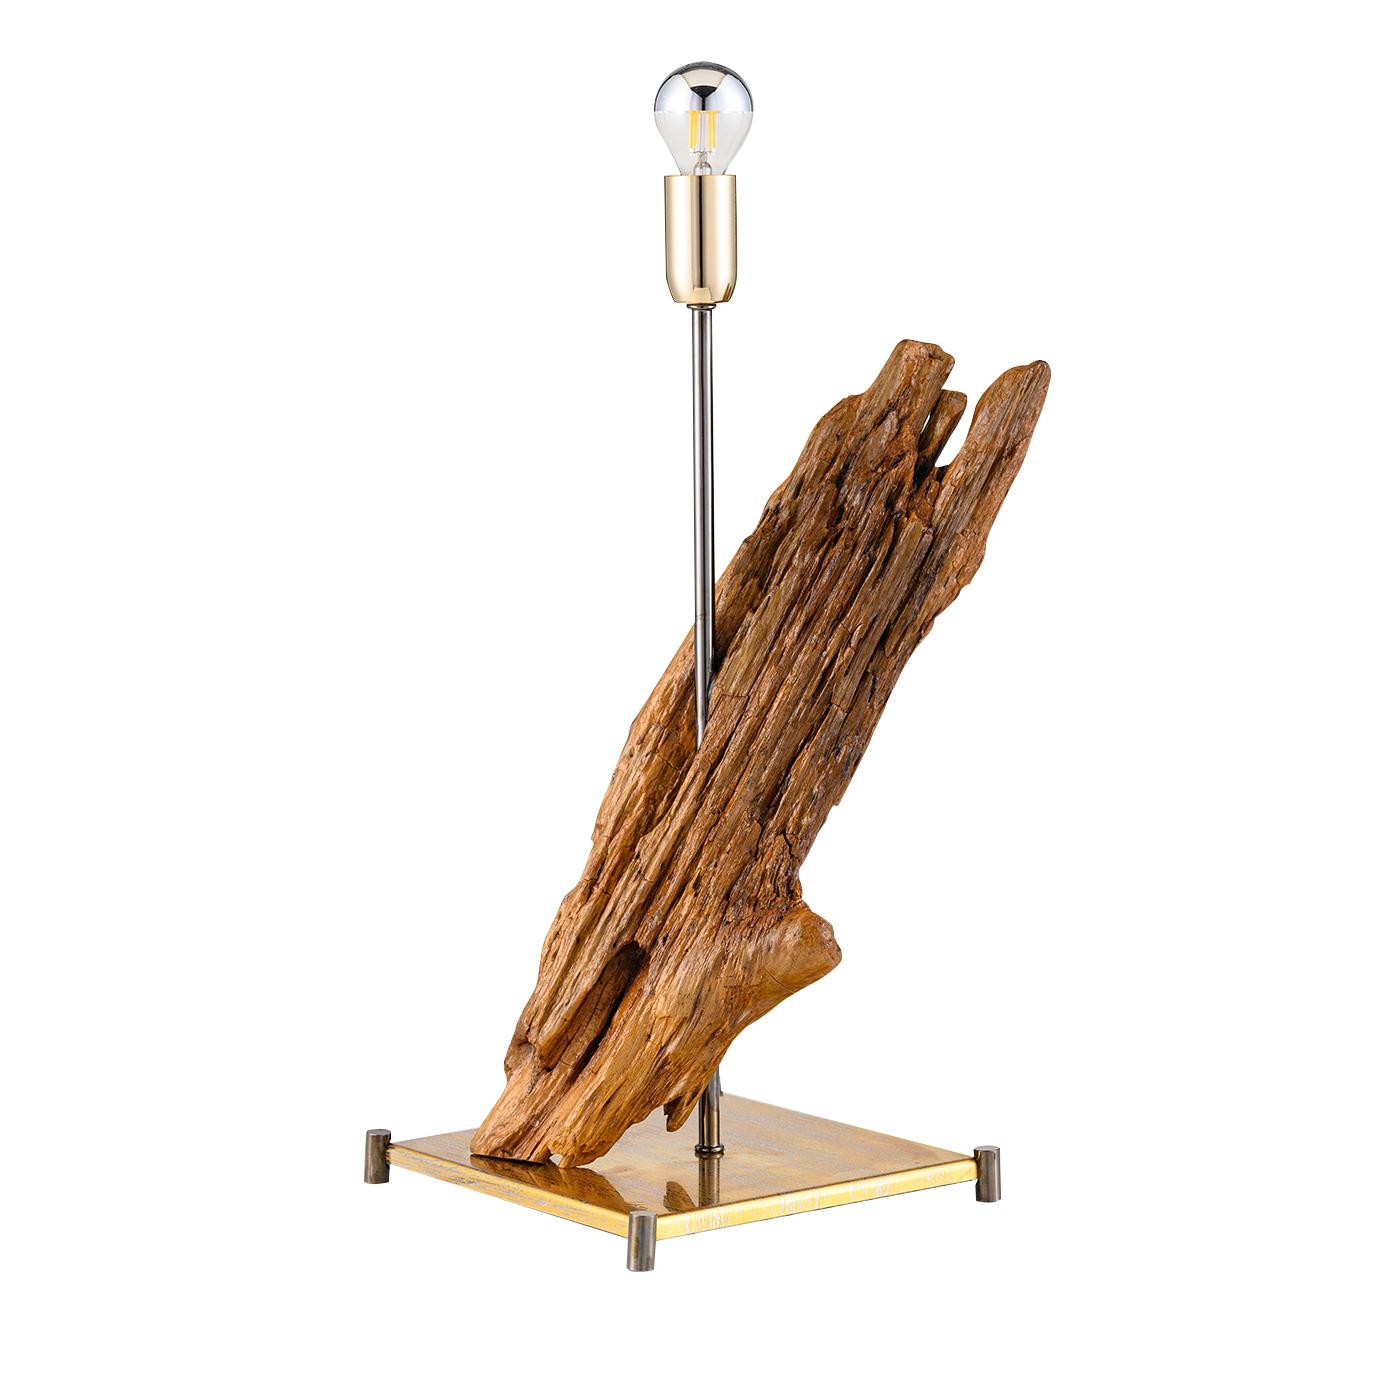 With its one-off base in reflective pure gold stainless steel and black brass feet, the Iceberg lighting sculpture features a piece of sea wood, from the Amalfi Coast, surrounding a black steel rod supporting a lamp holder with a spherical white and